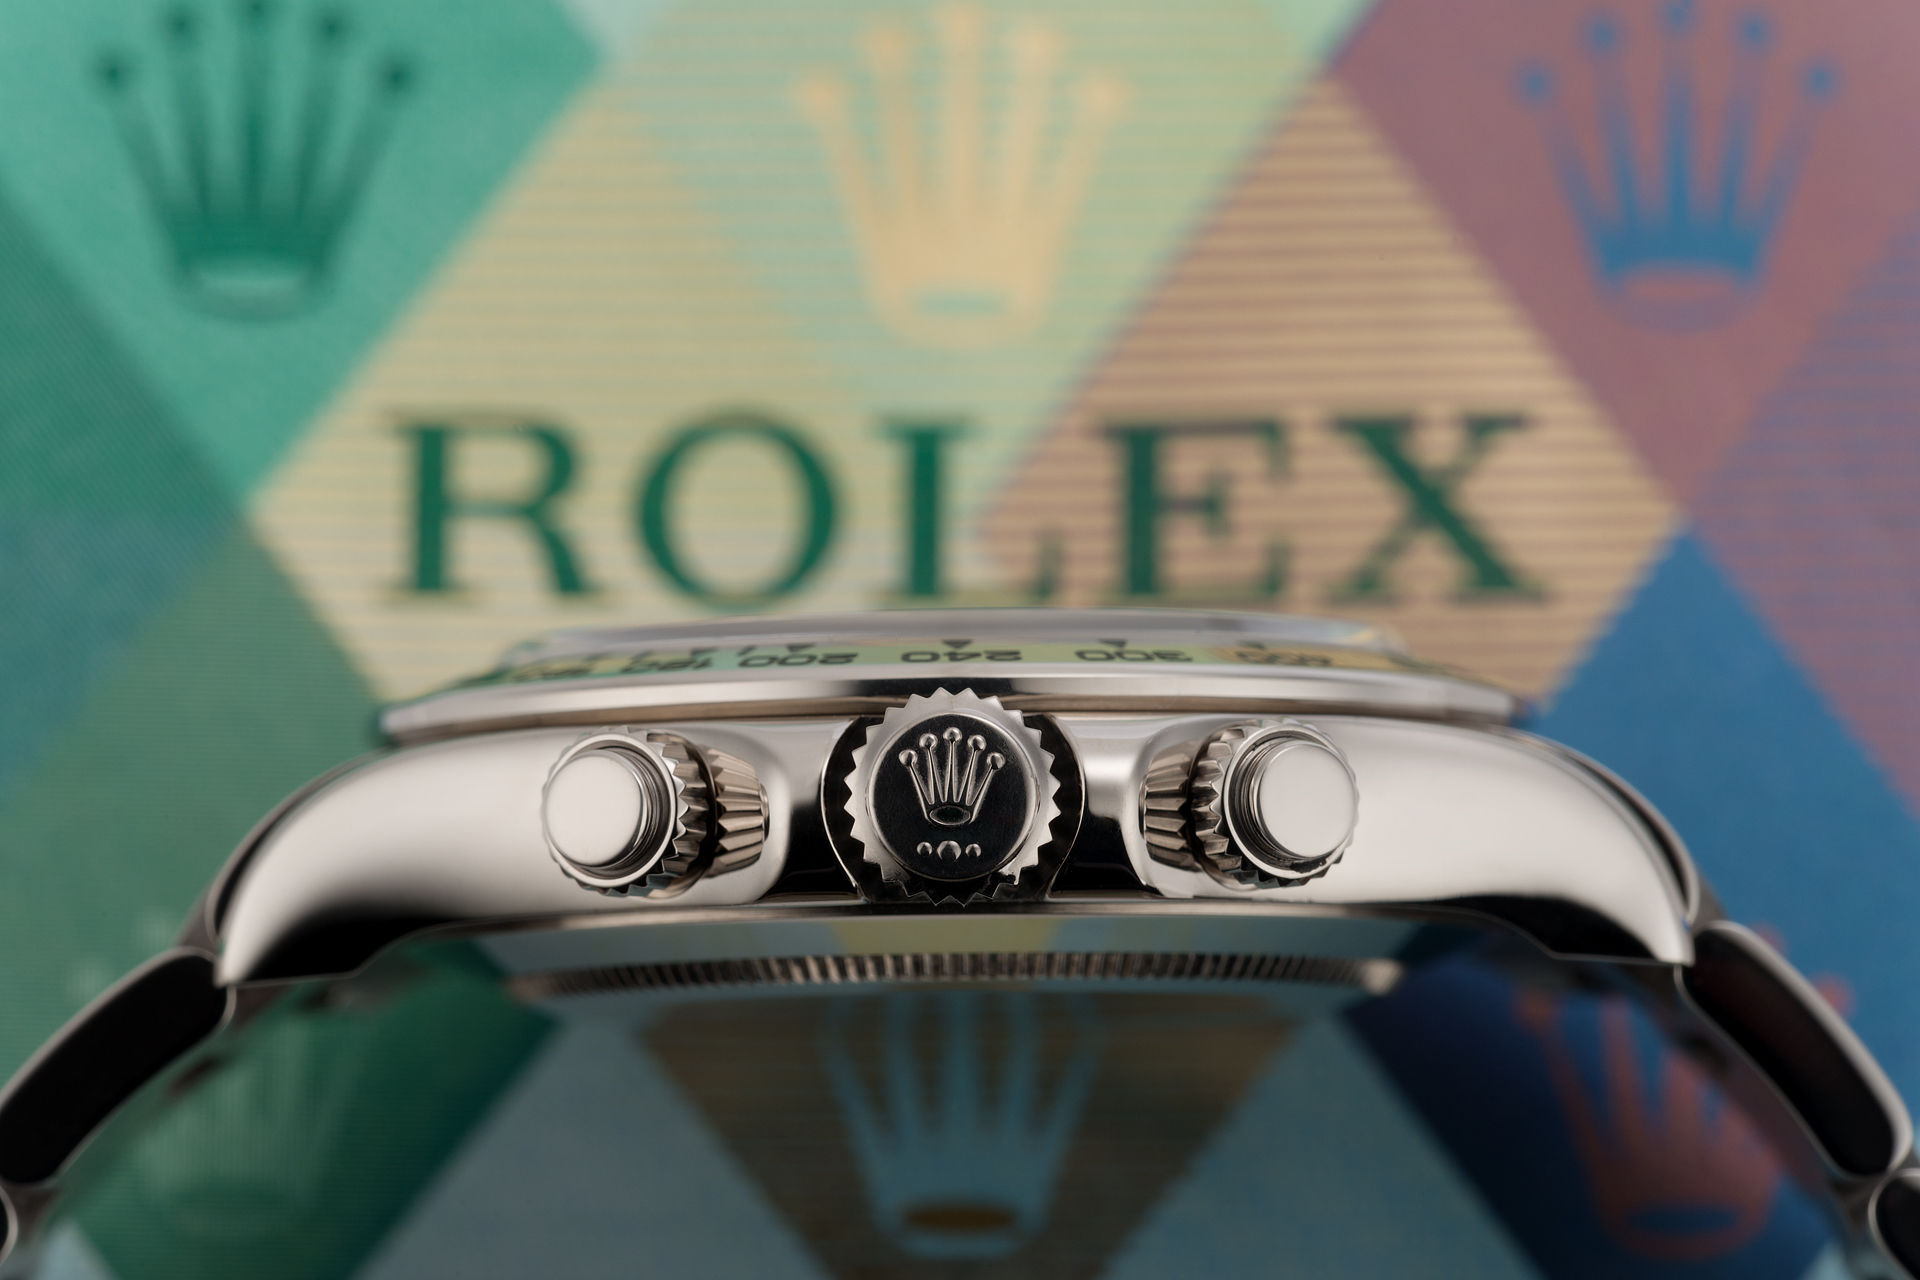 ref 116509 | '3 Colour Panda' Box and Papers | Rolex Cosmograph Daytona